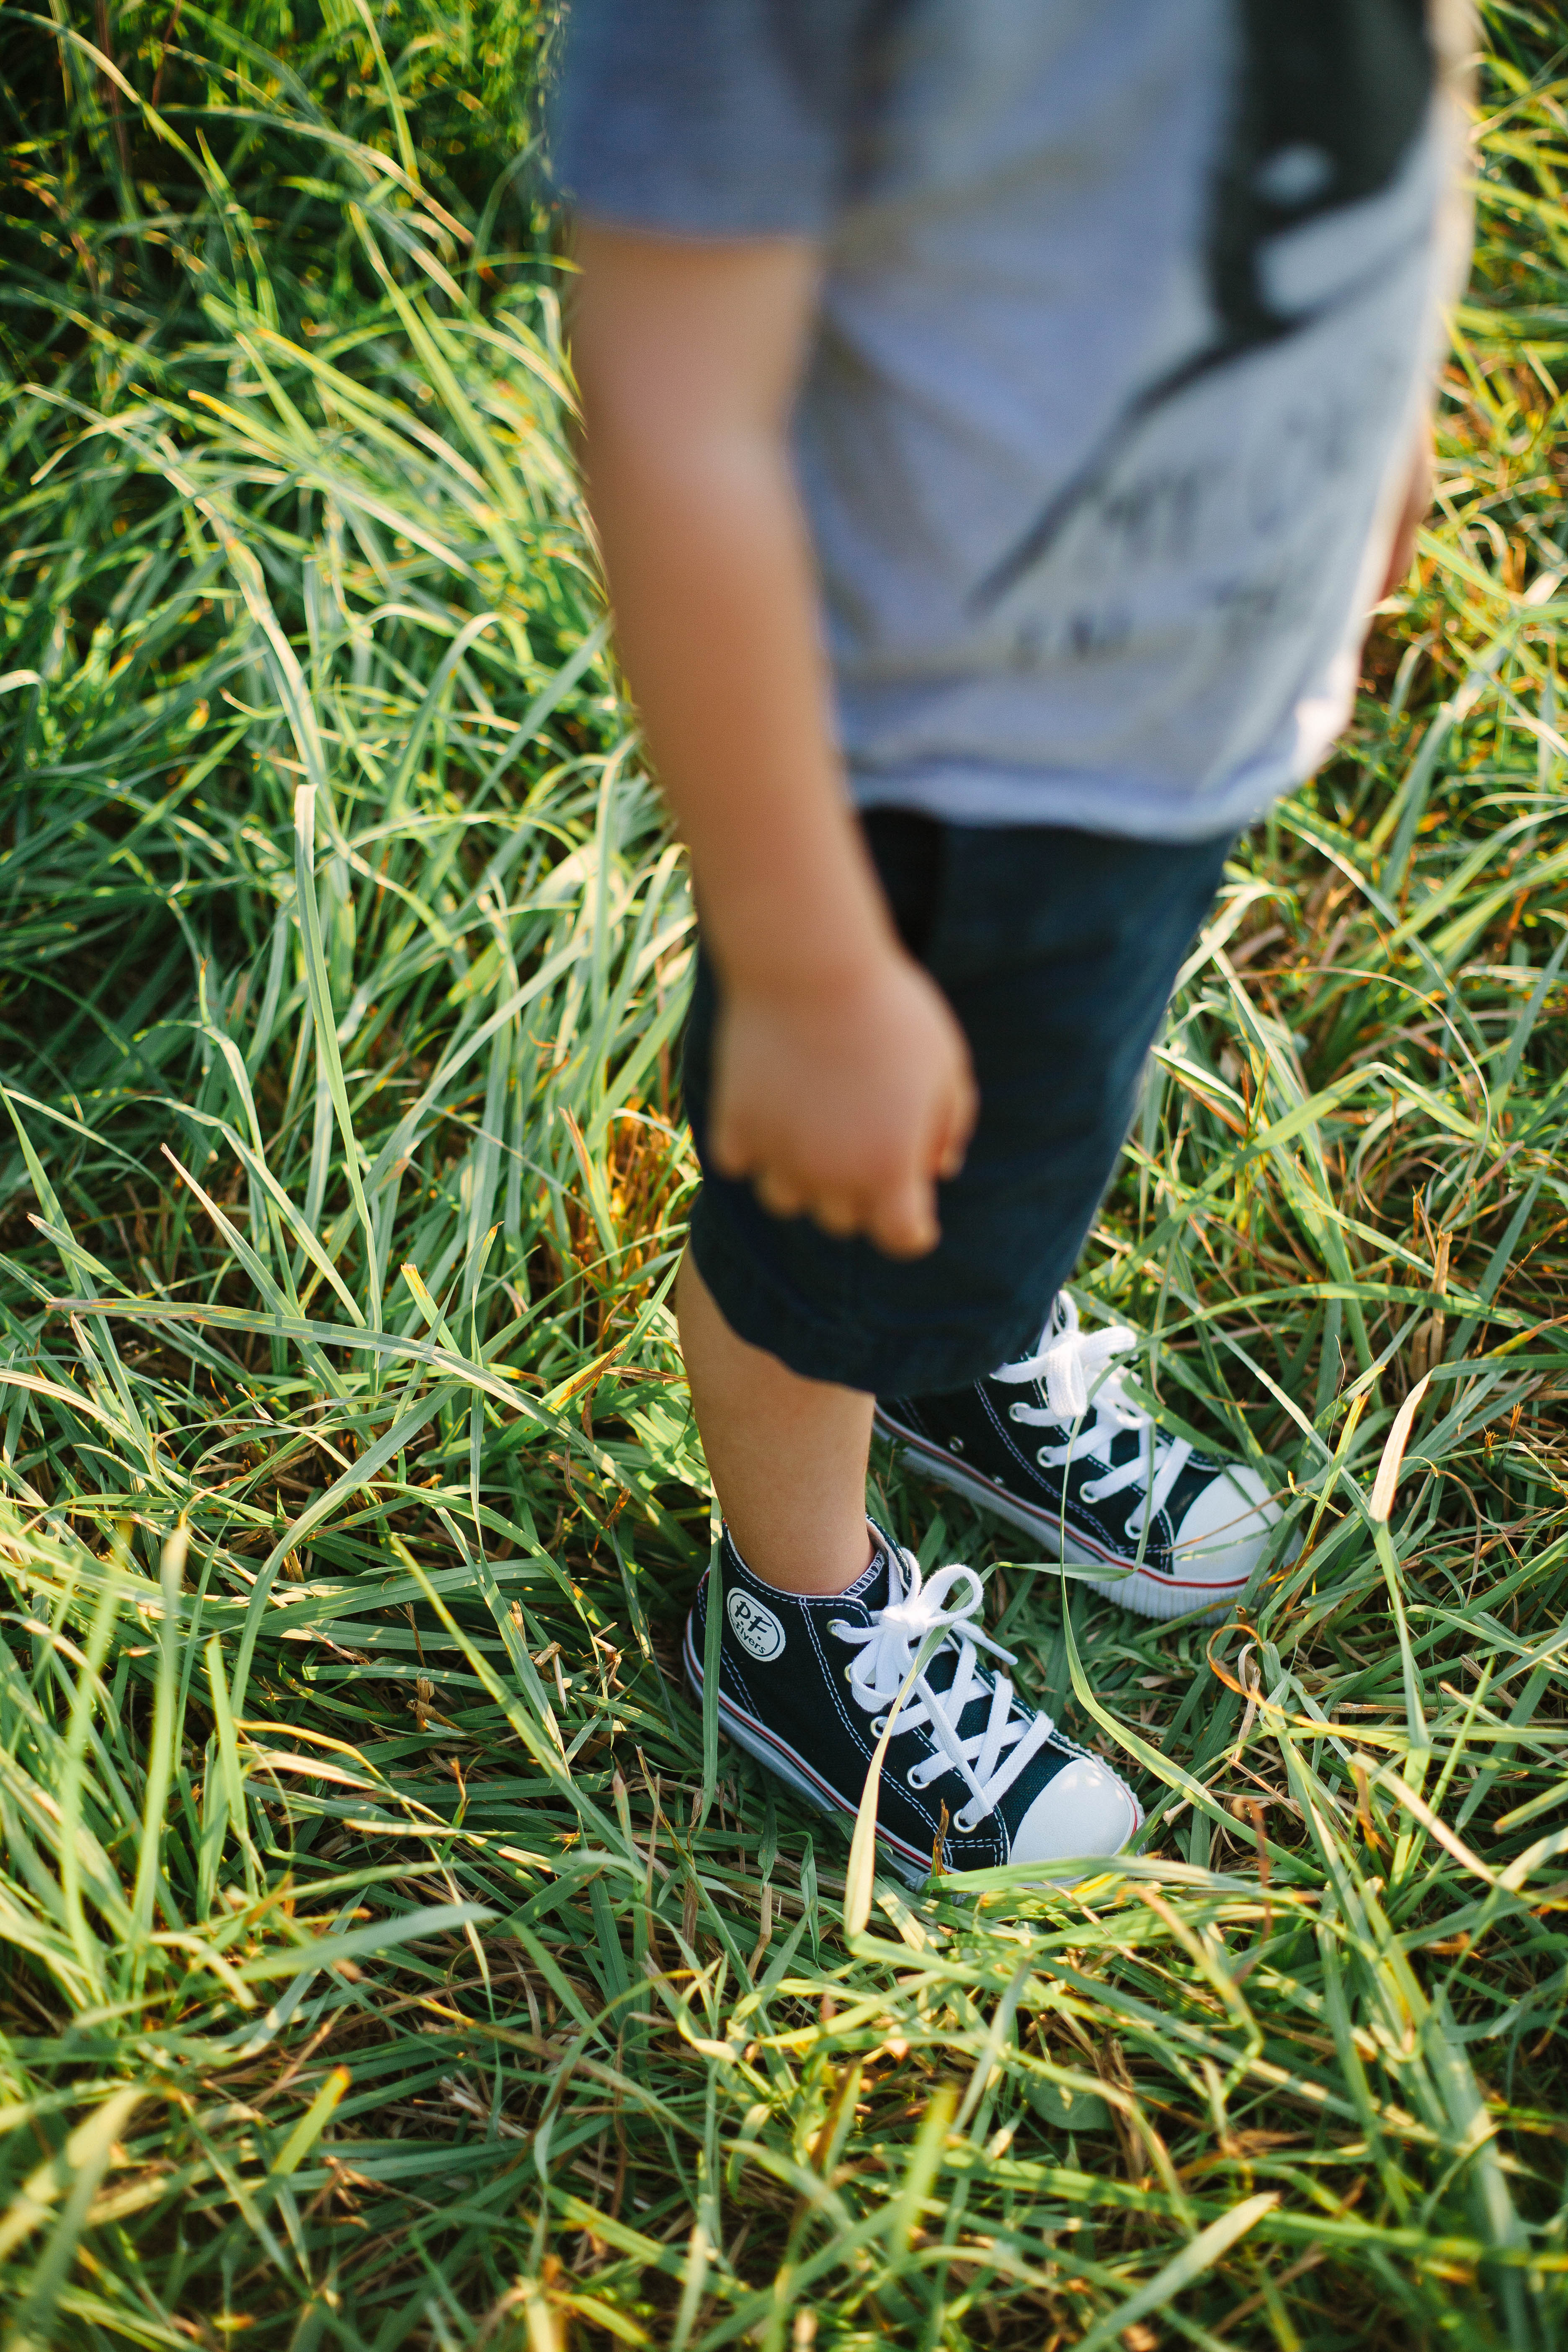 The bond between a brother and a sister, why PF Flyers are the shoe of choice for energetic toddlers.